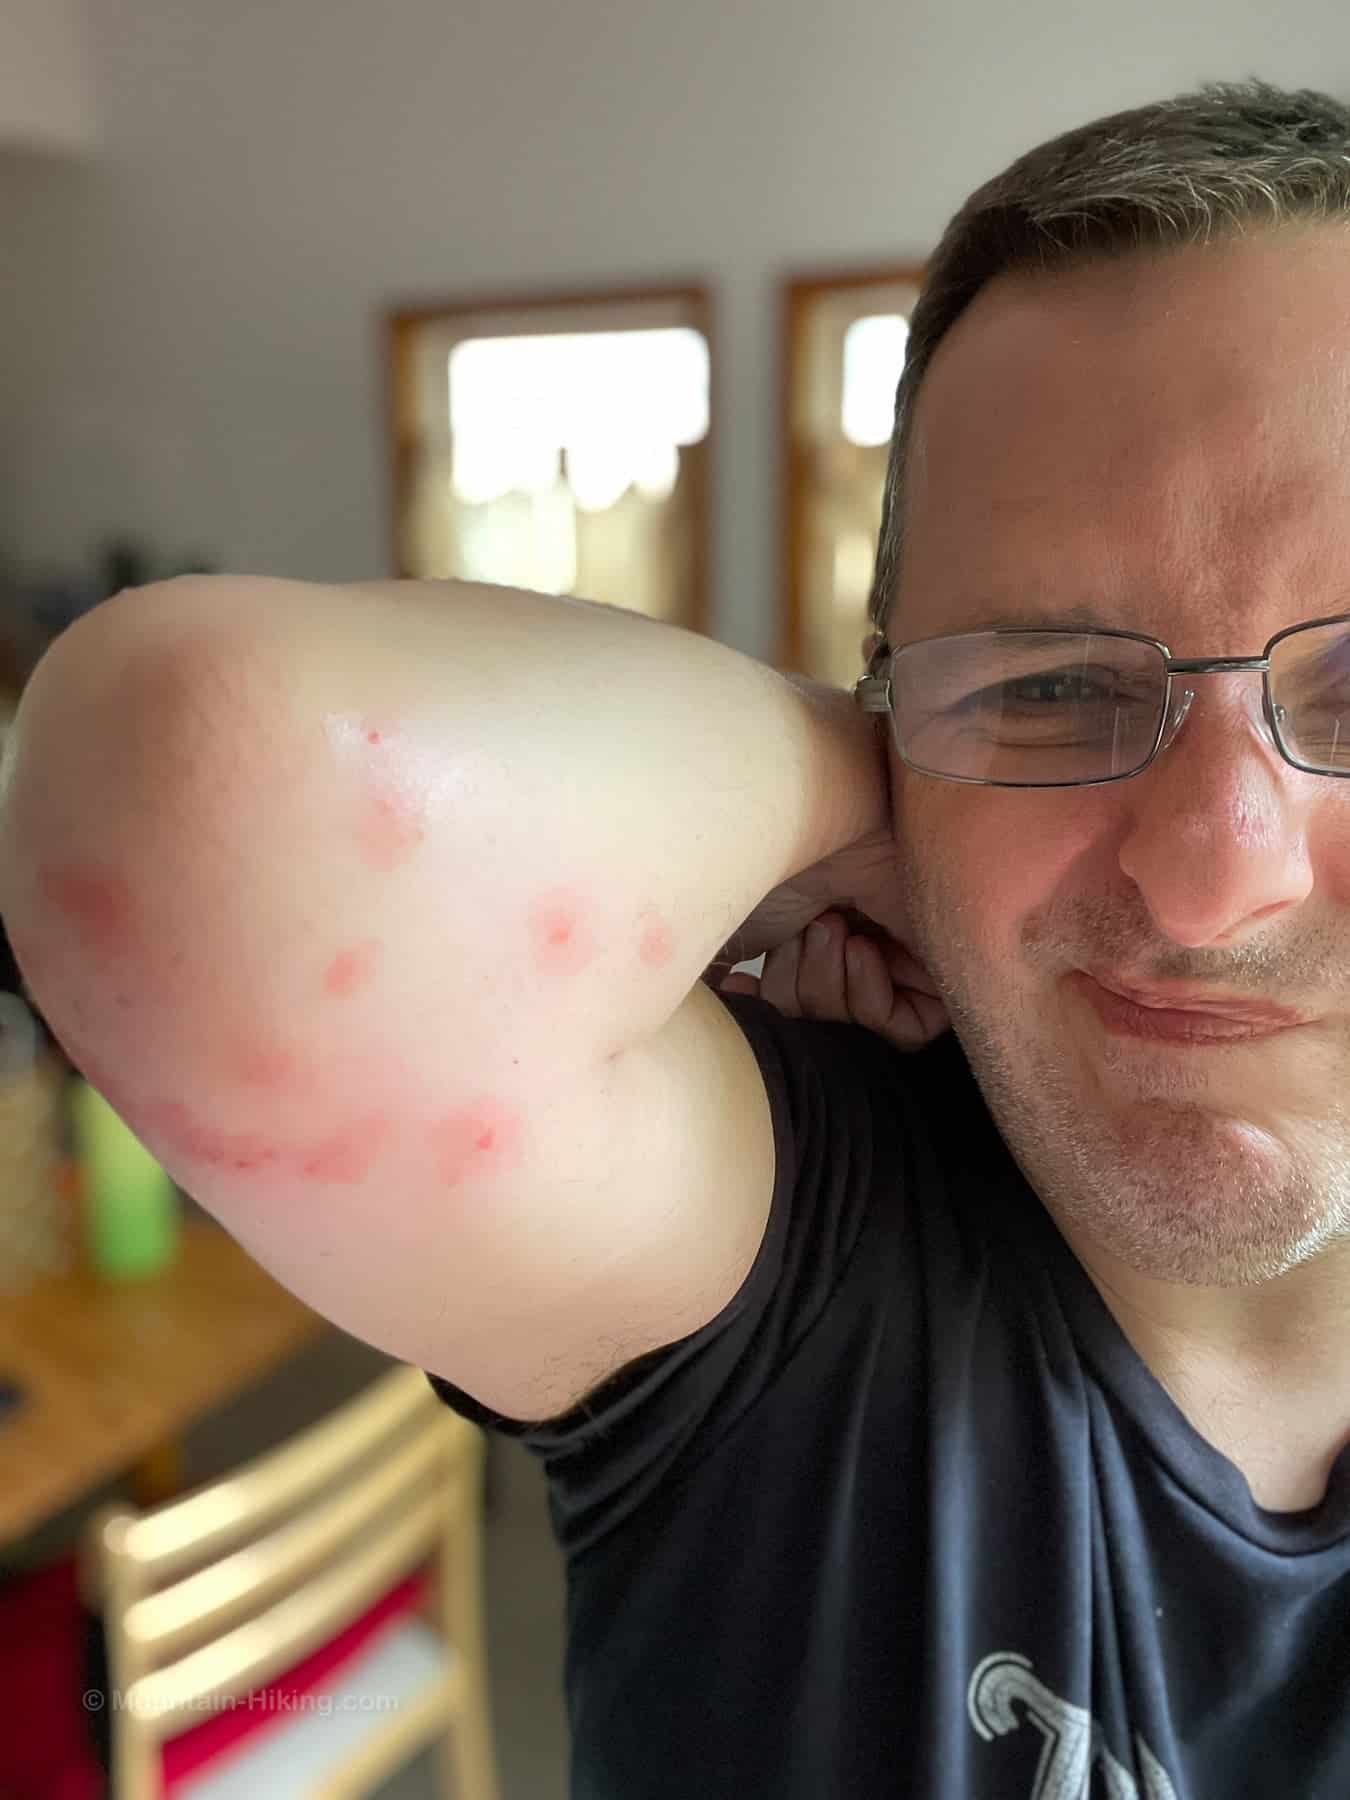 mosquito bites on exceptionally white male